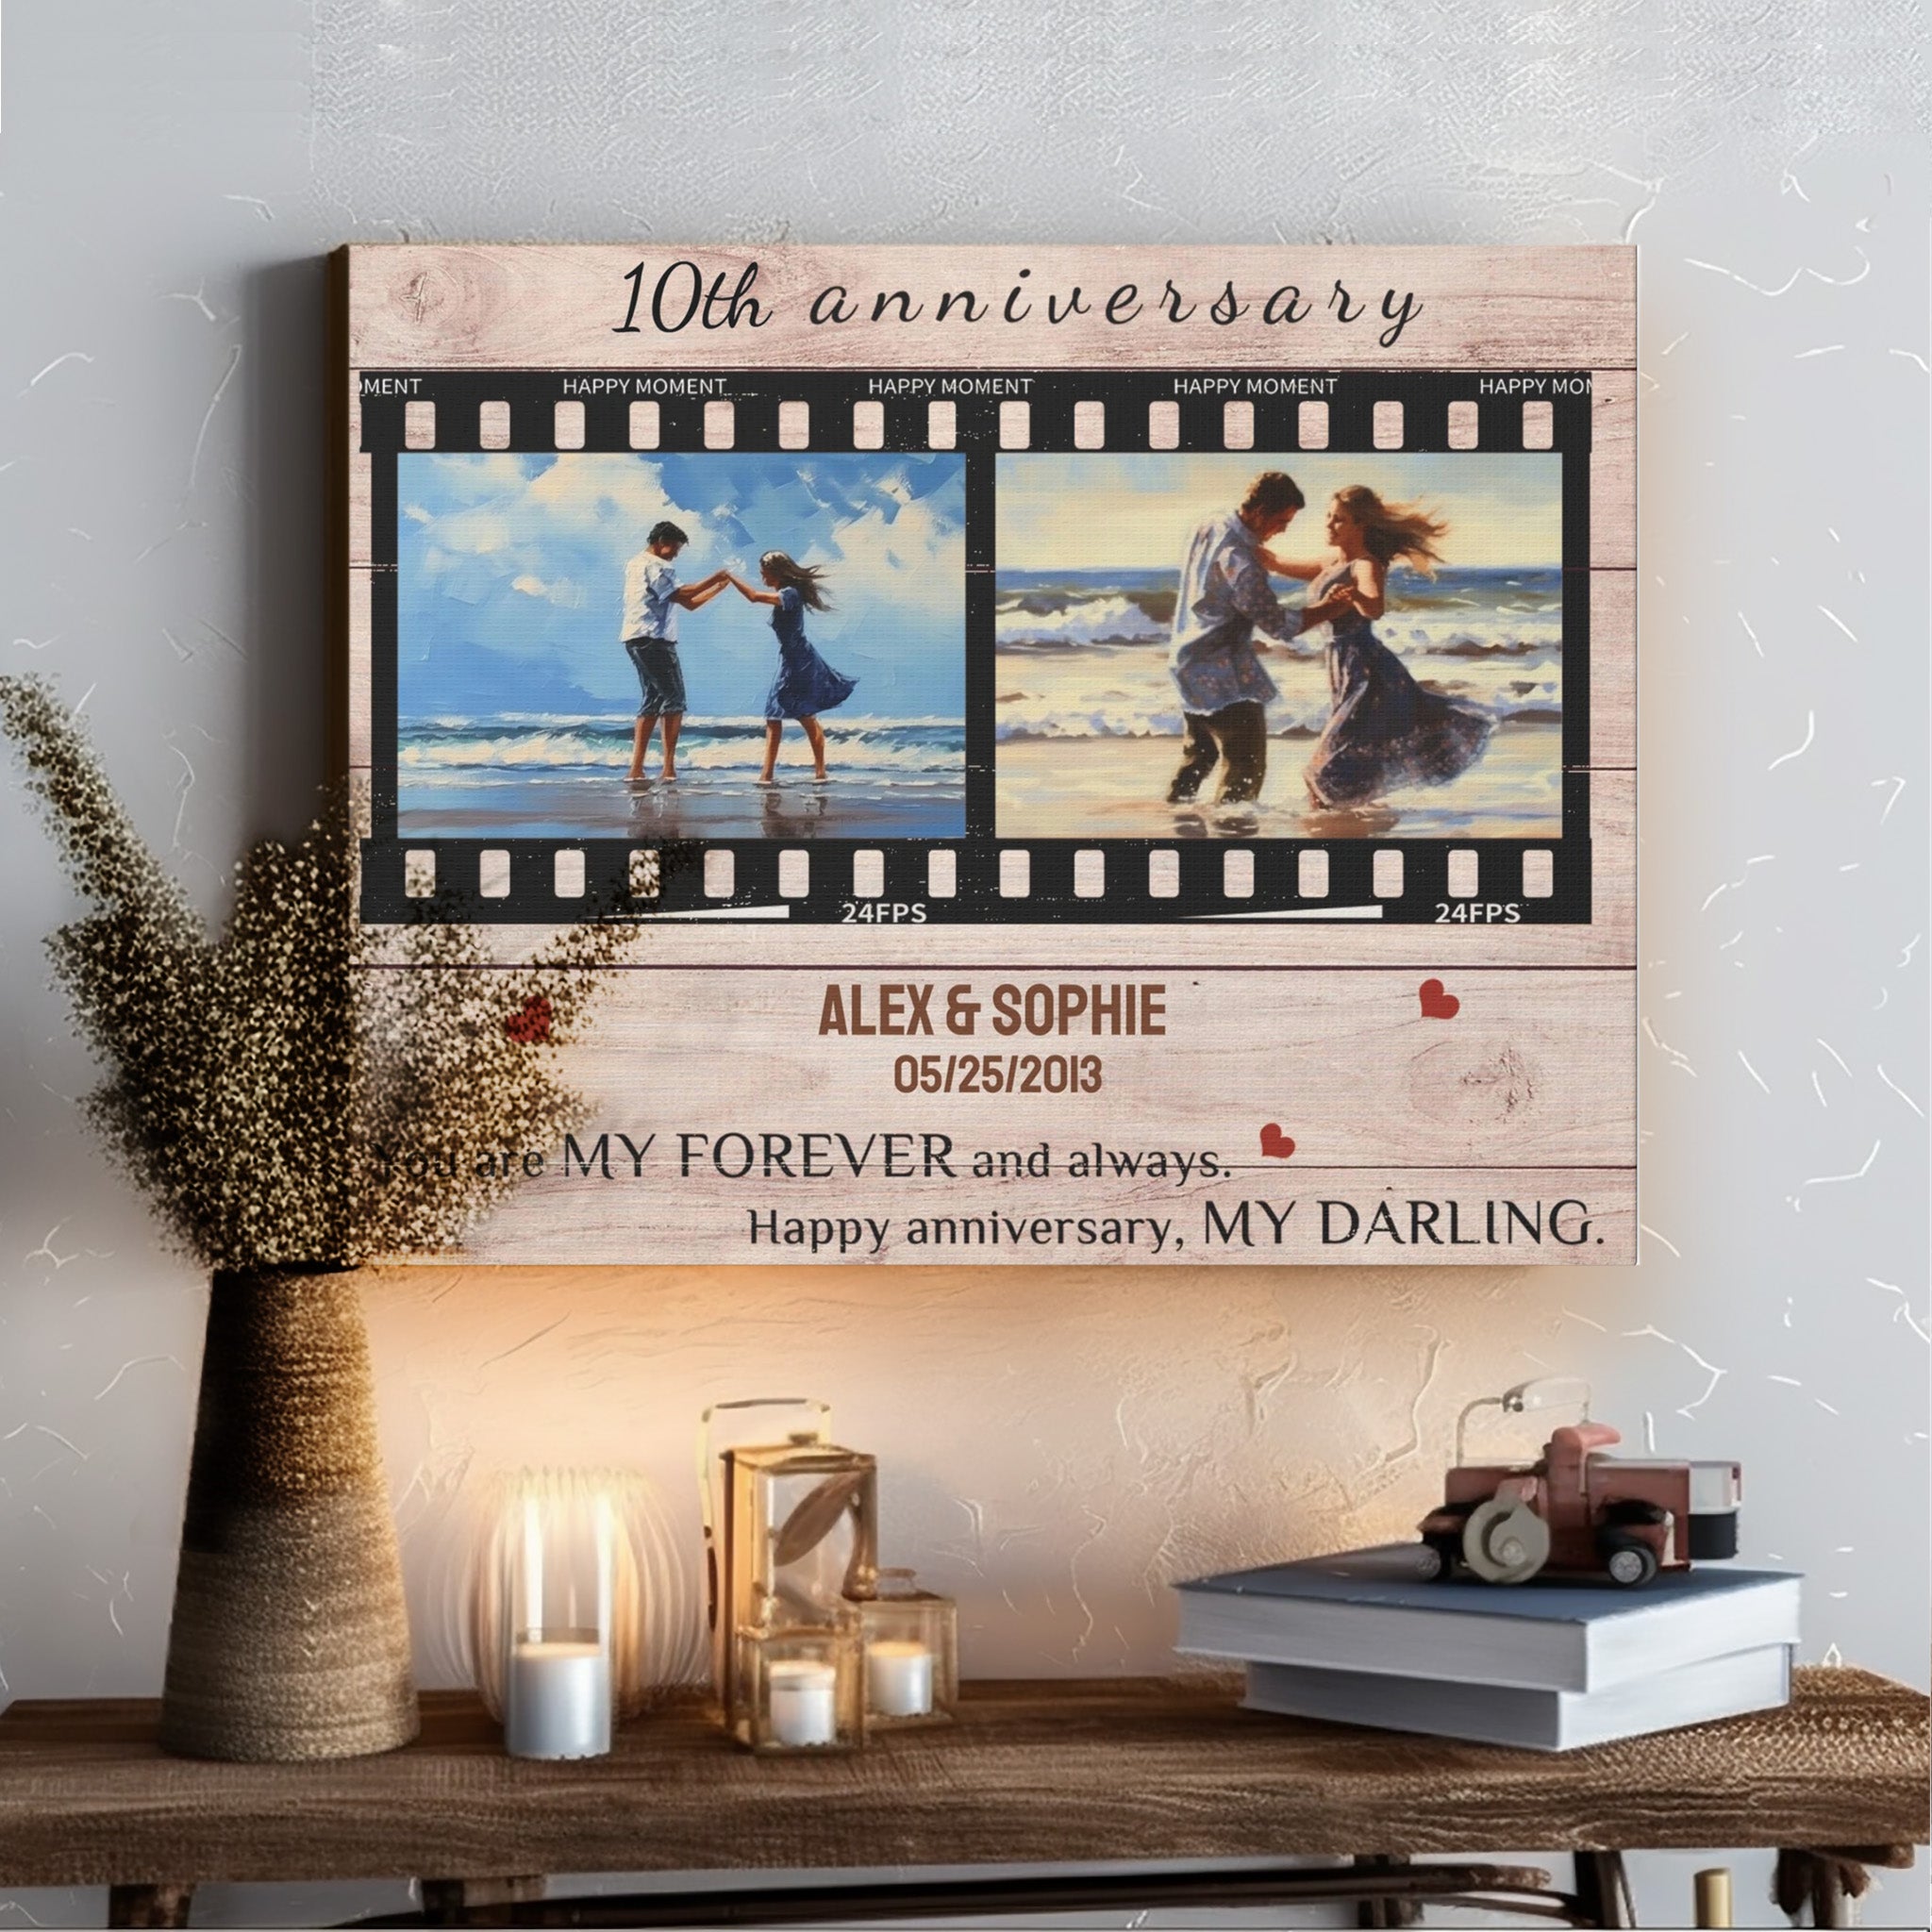 Happy Moments - Personalized Photo Canvas Print Anniversary Gifts